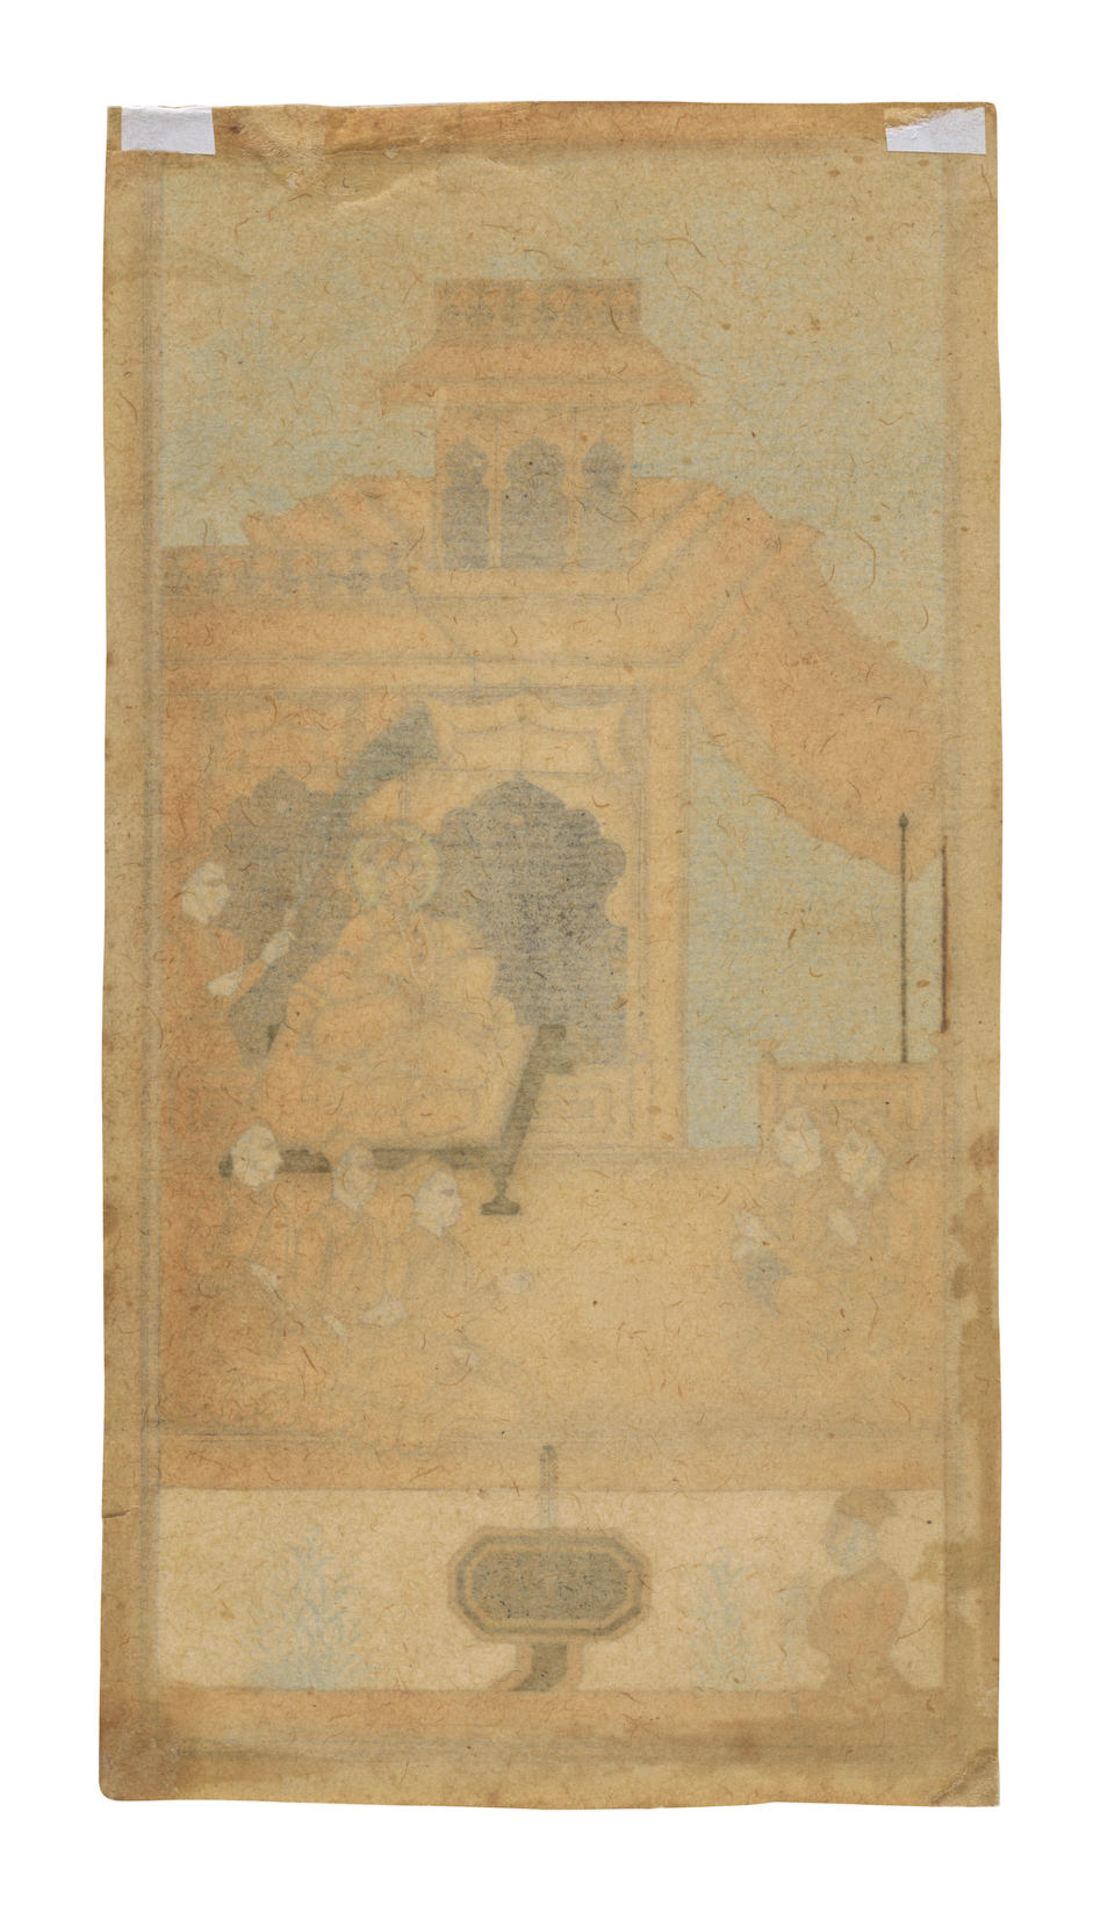 PRICE MANOHAR BEING ENTERTAINED DECCAN, PROBABLY GOLCONDA, EARLY 18TH CENTURY - Bild 2 aus 2